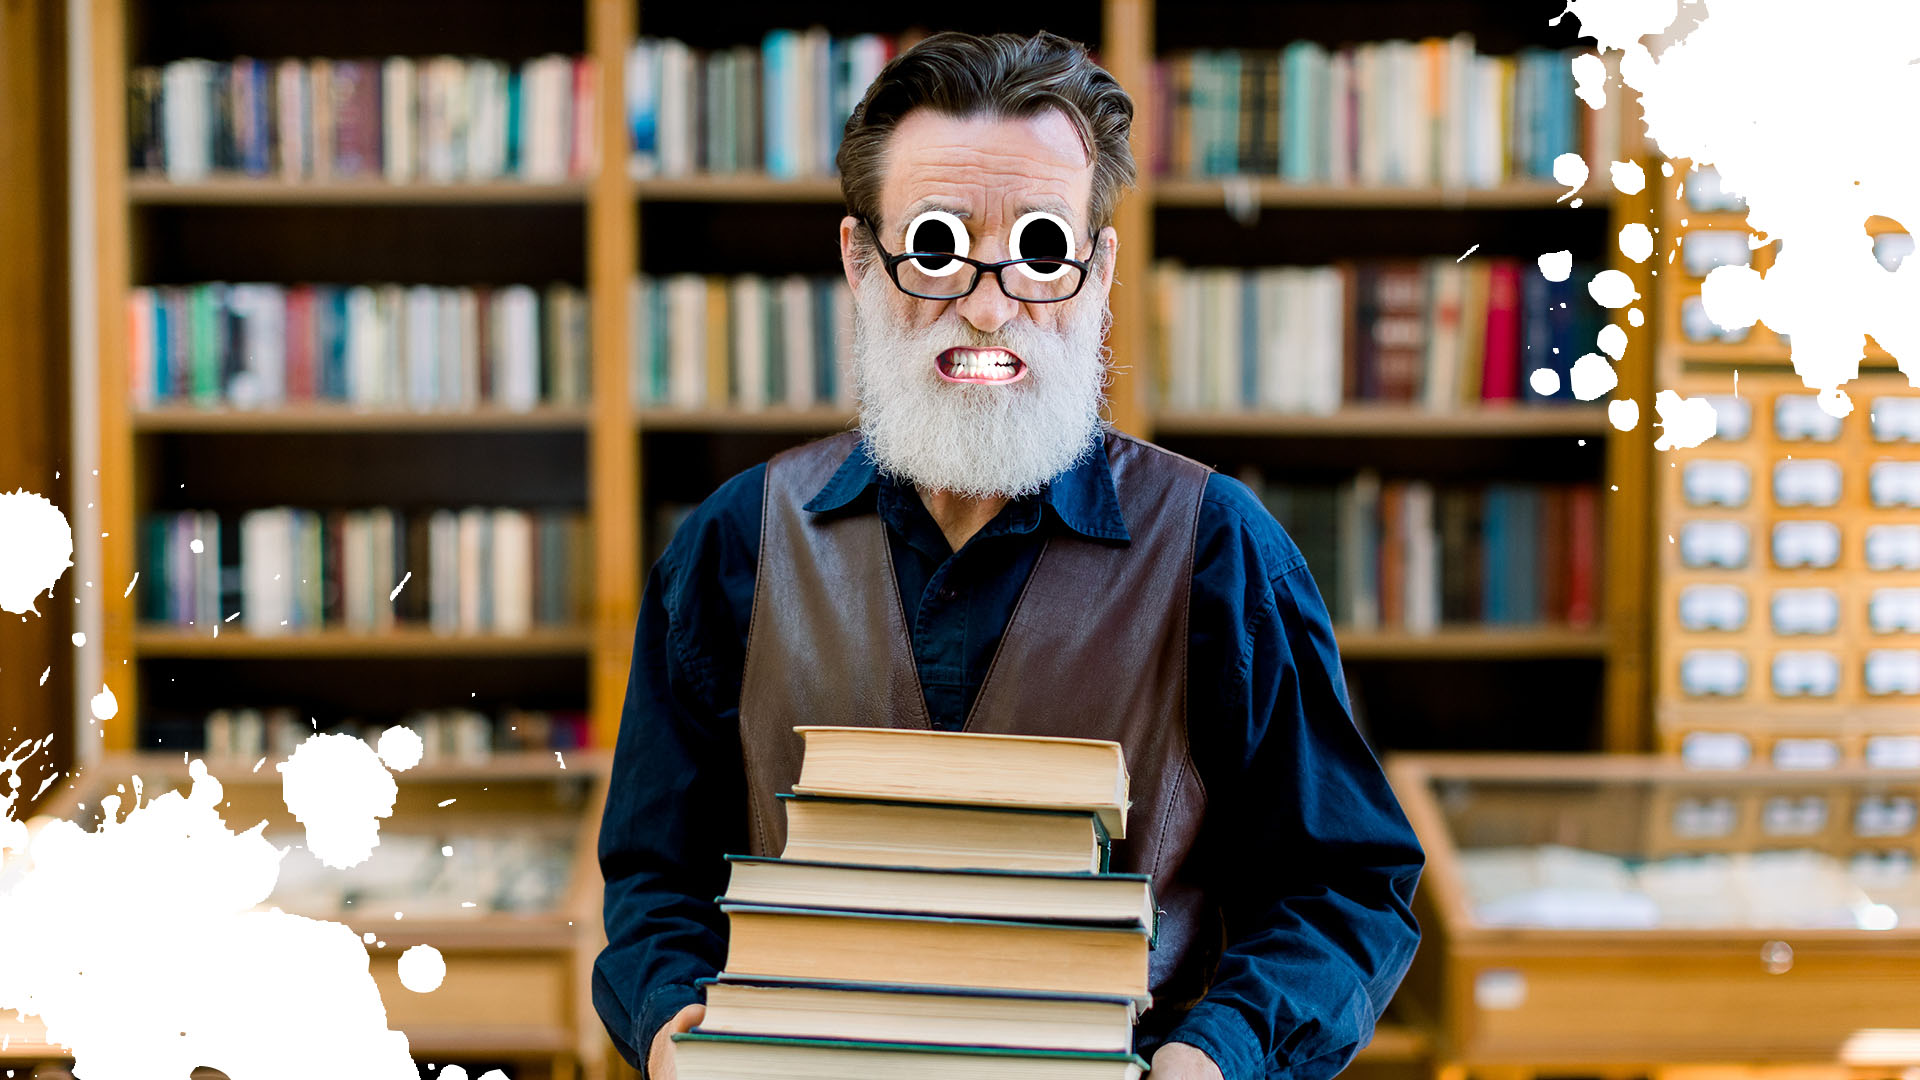 A bearded librarian holding books